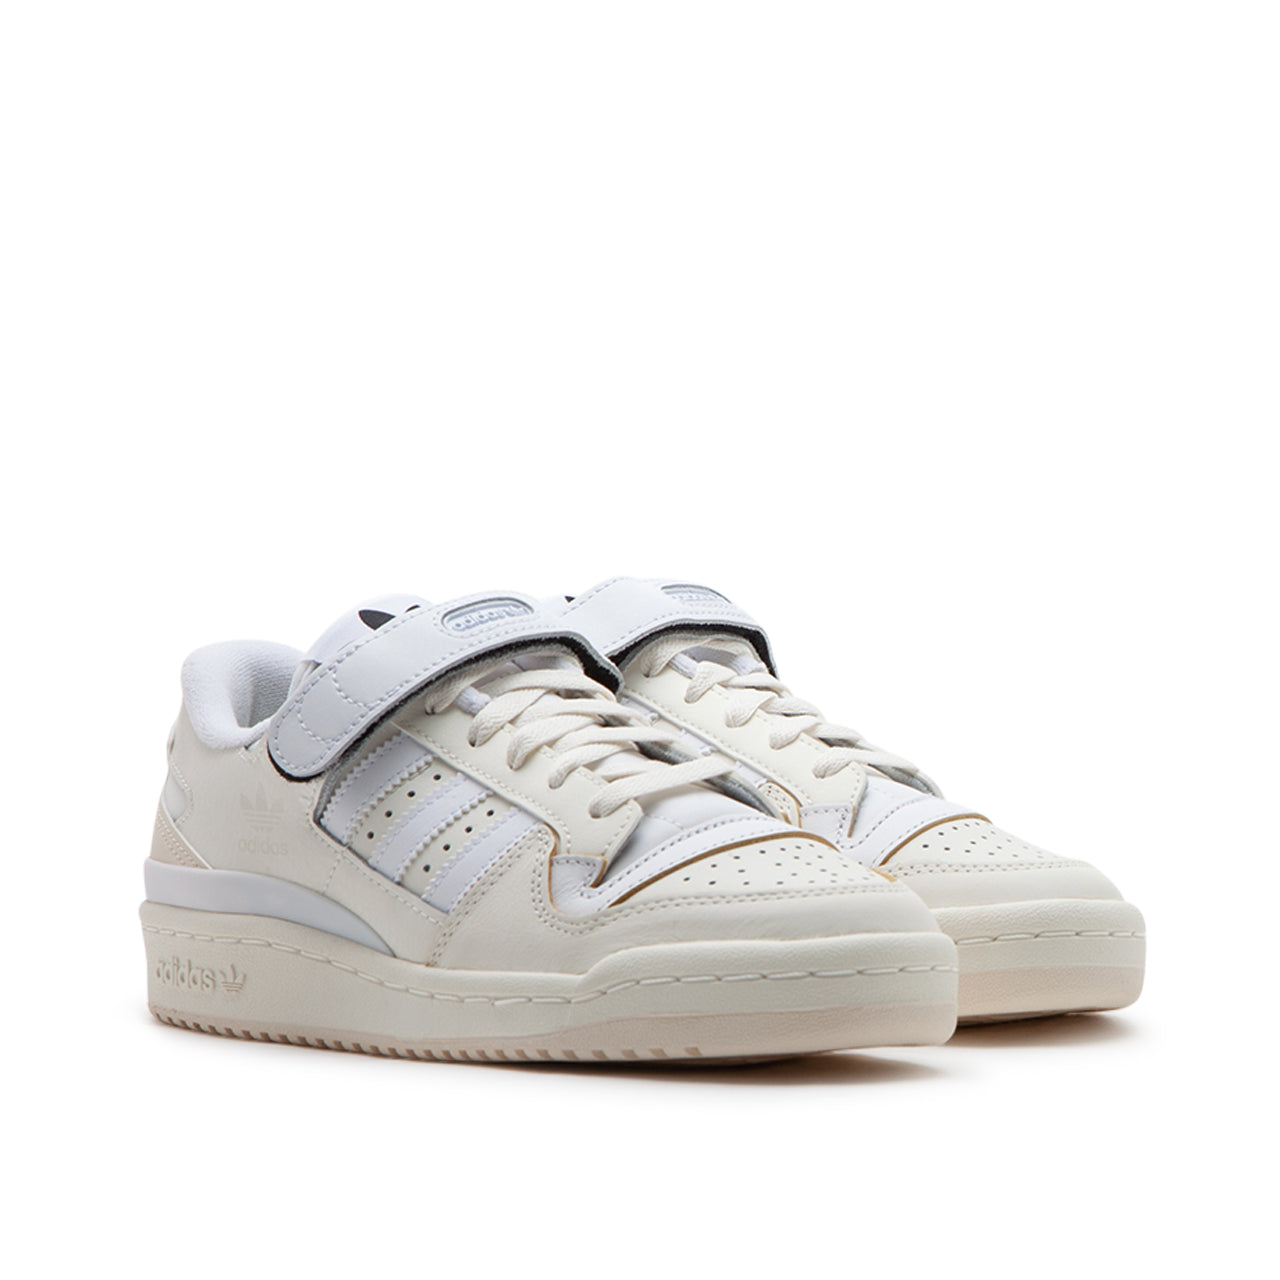 adidas Forum (White) – Store Allike Low WMNS GY9457